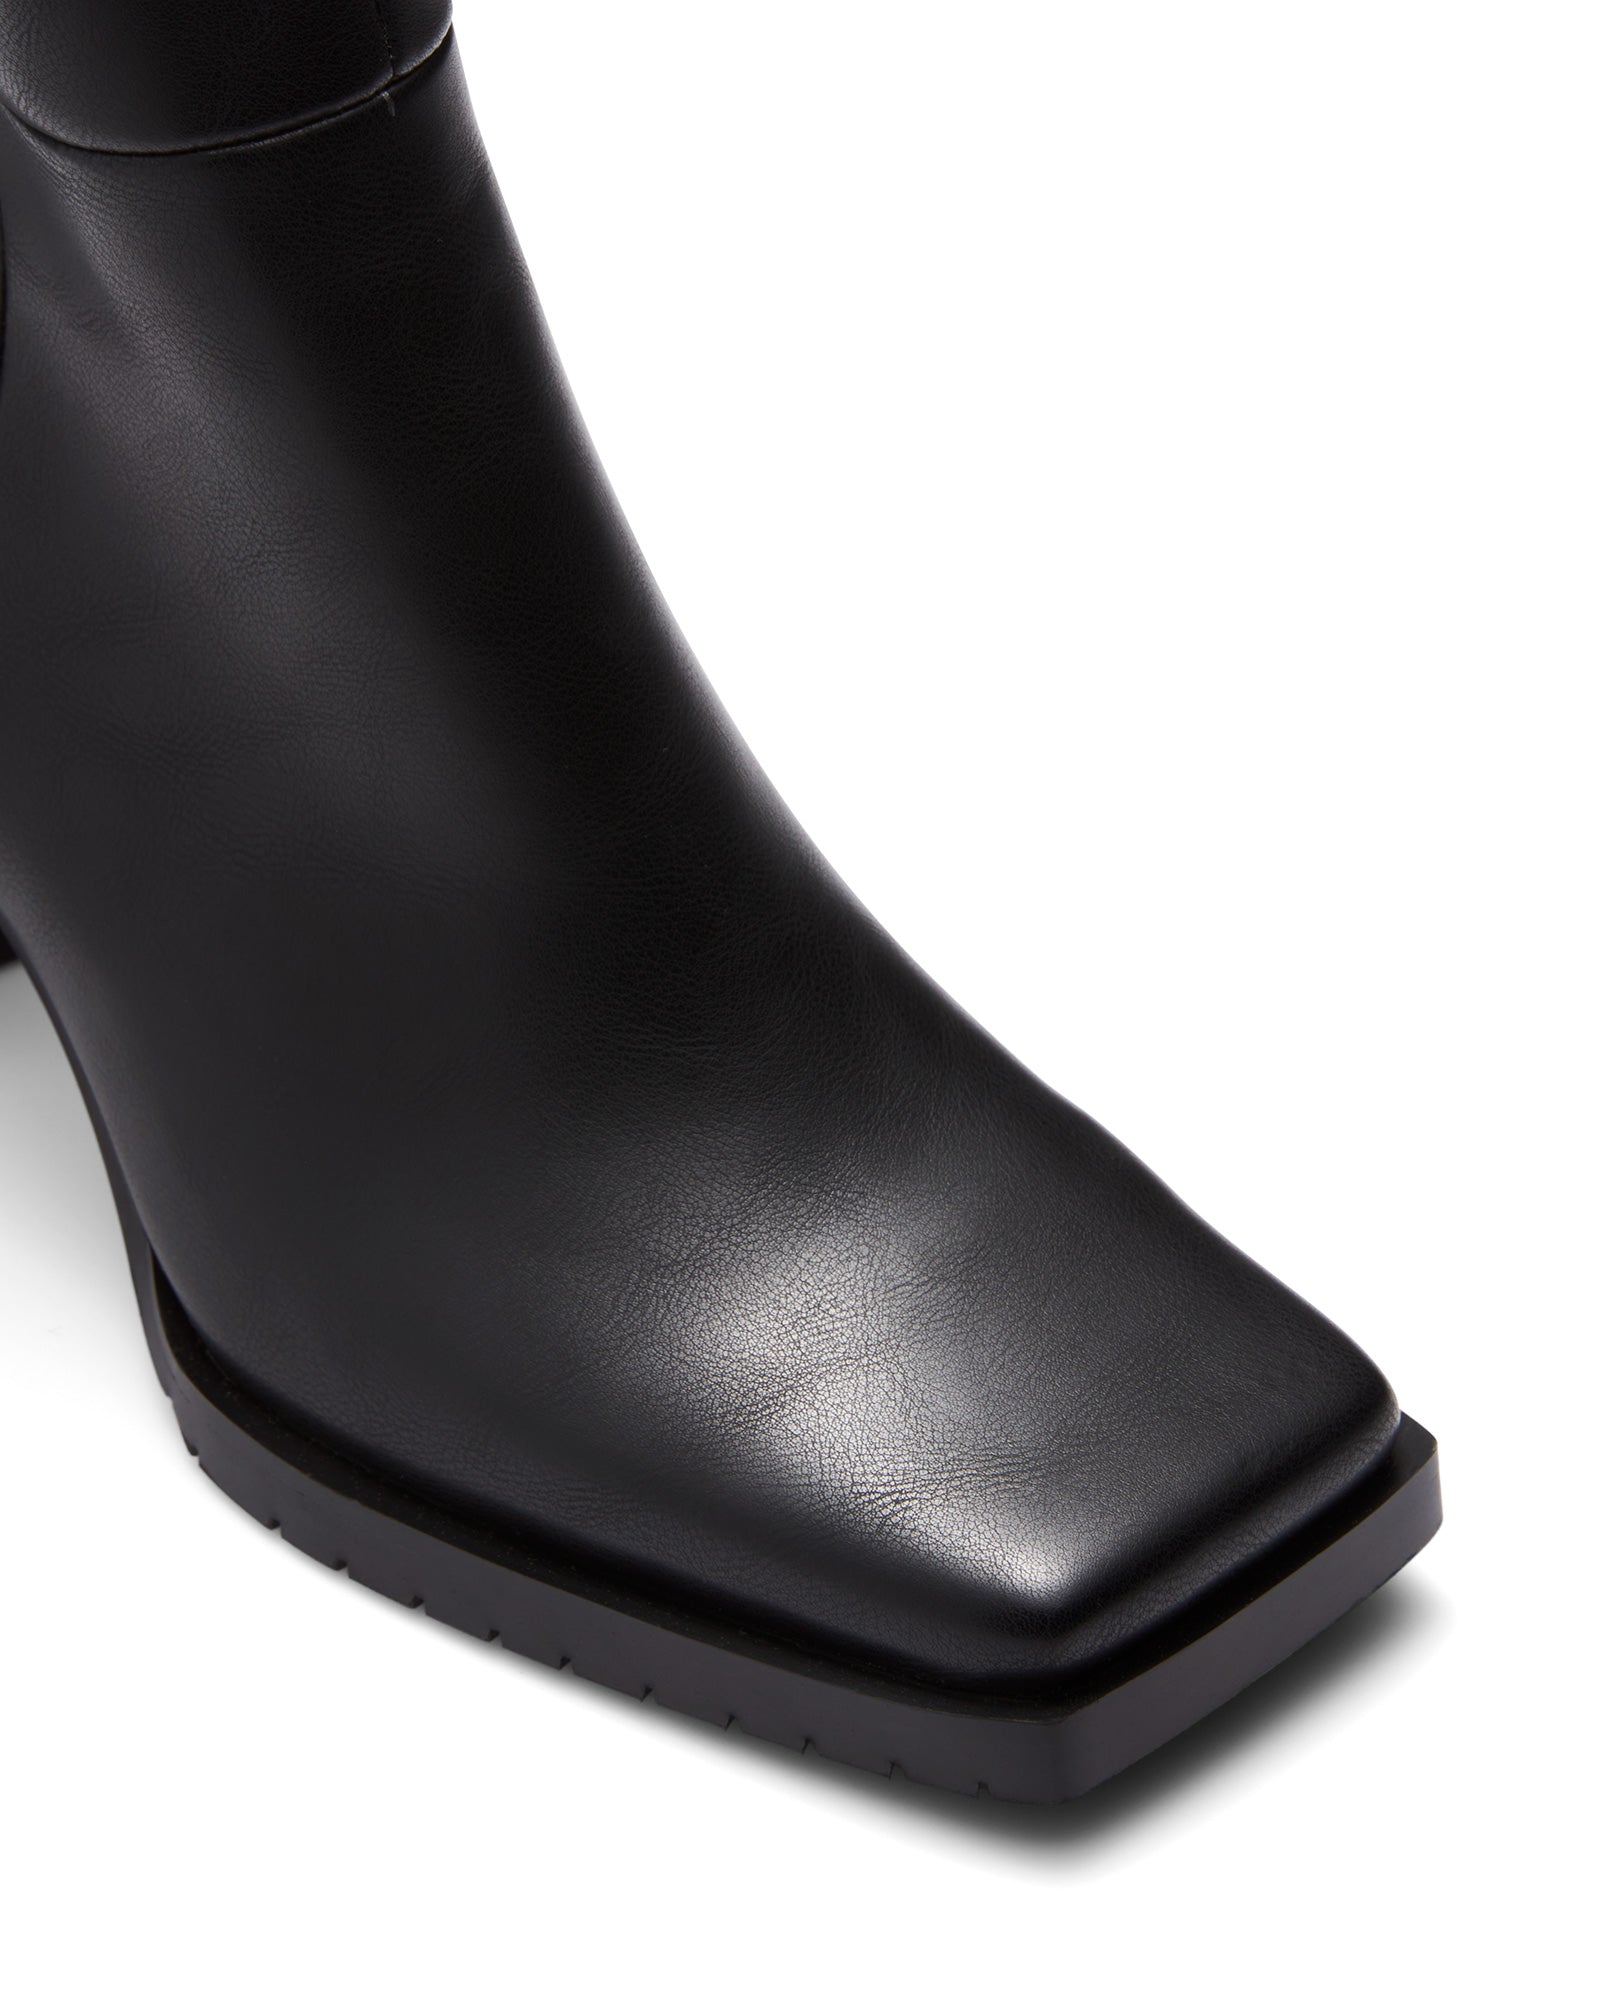 Therapy Shoes Camelia Black | Women's Boots | Ankle | Dress | Mid Heel